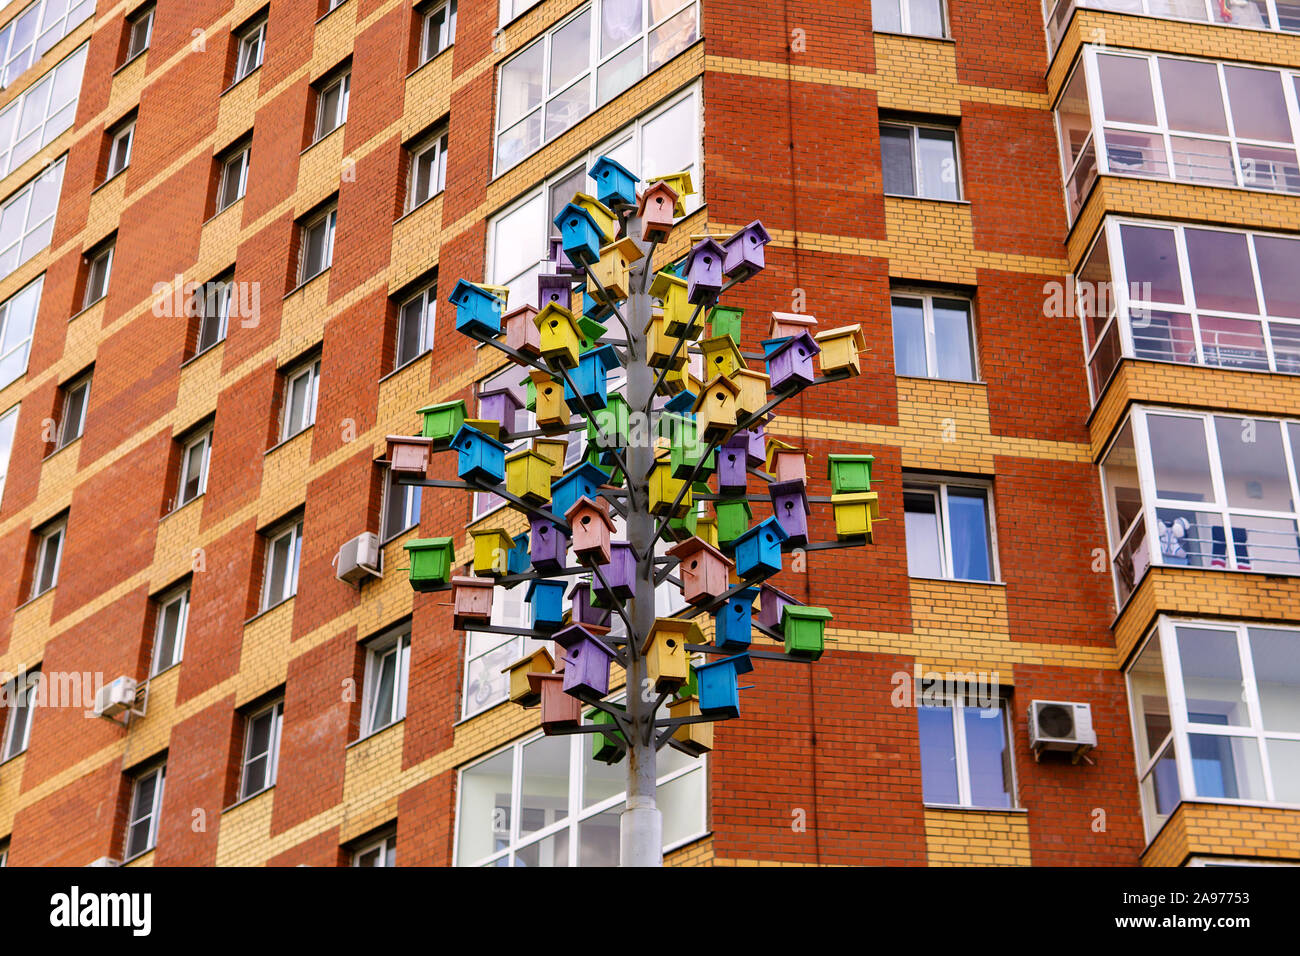 Perm, Russia - August 04, 2019: art object tree of birdhouses on the background wall of an apartment building Stock Photo